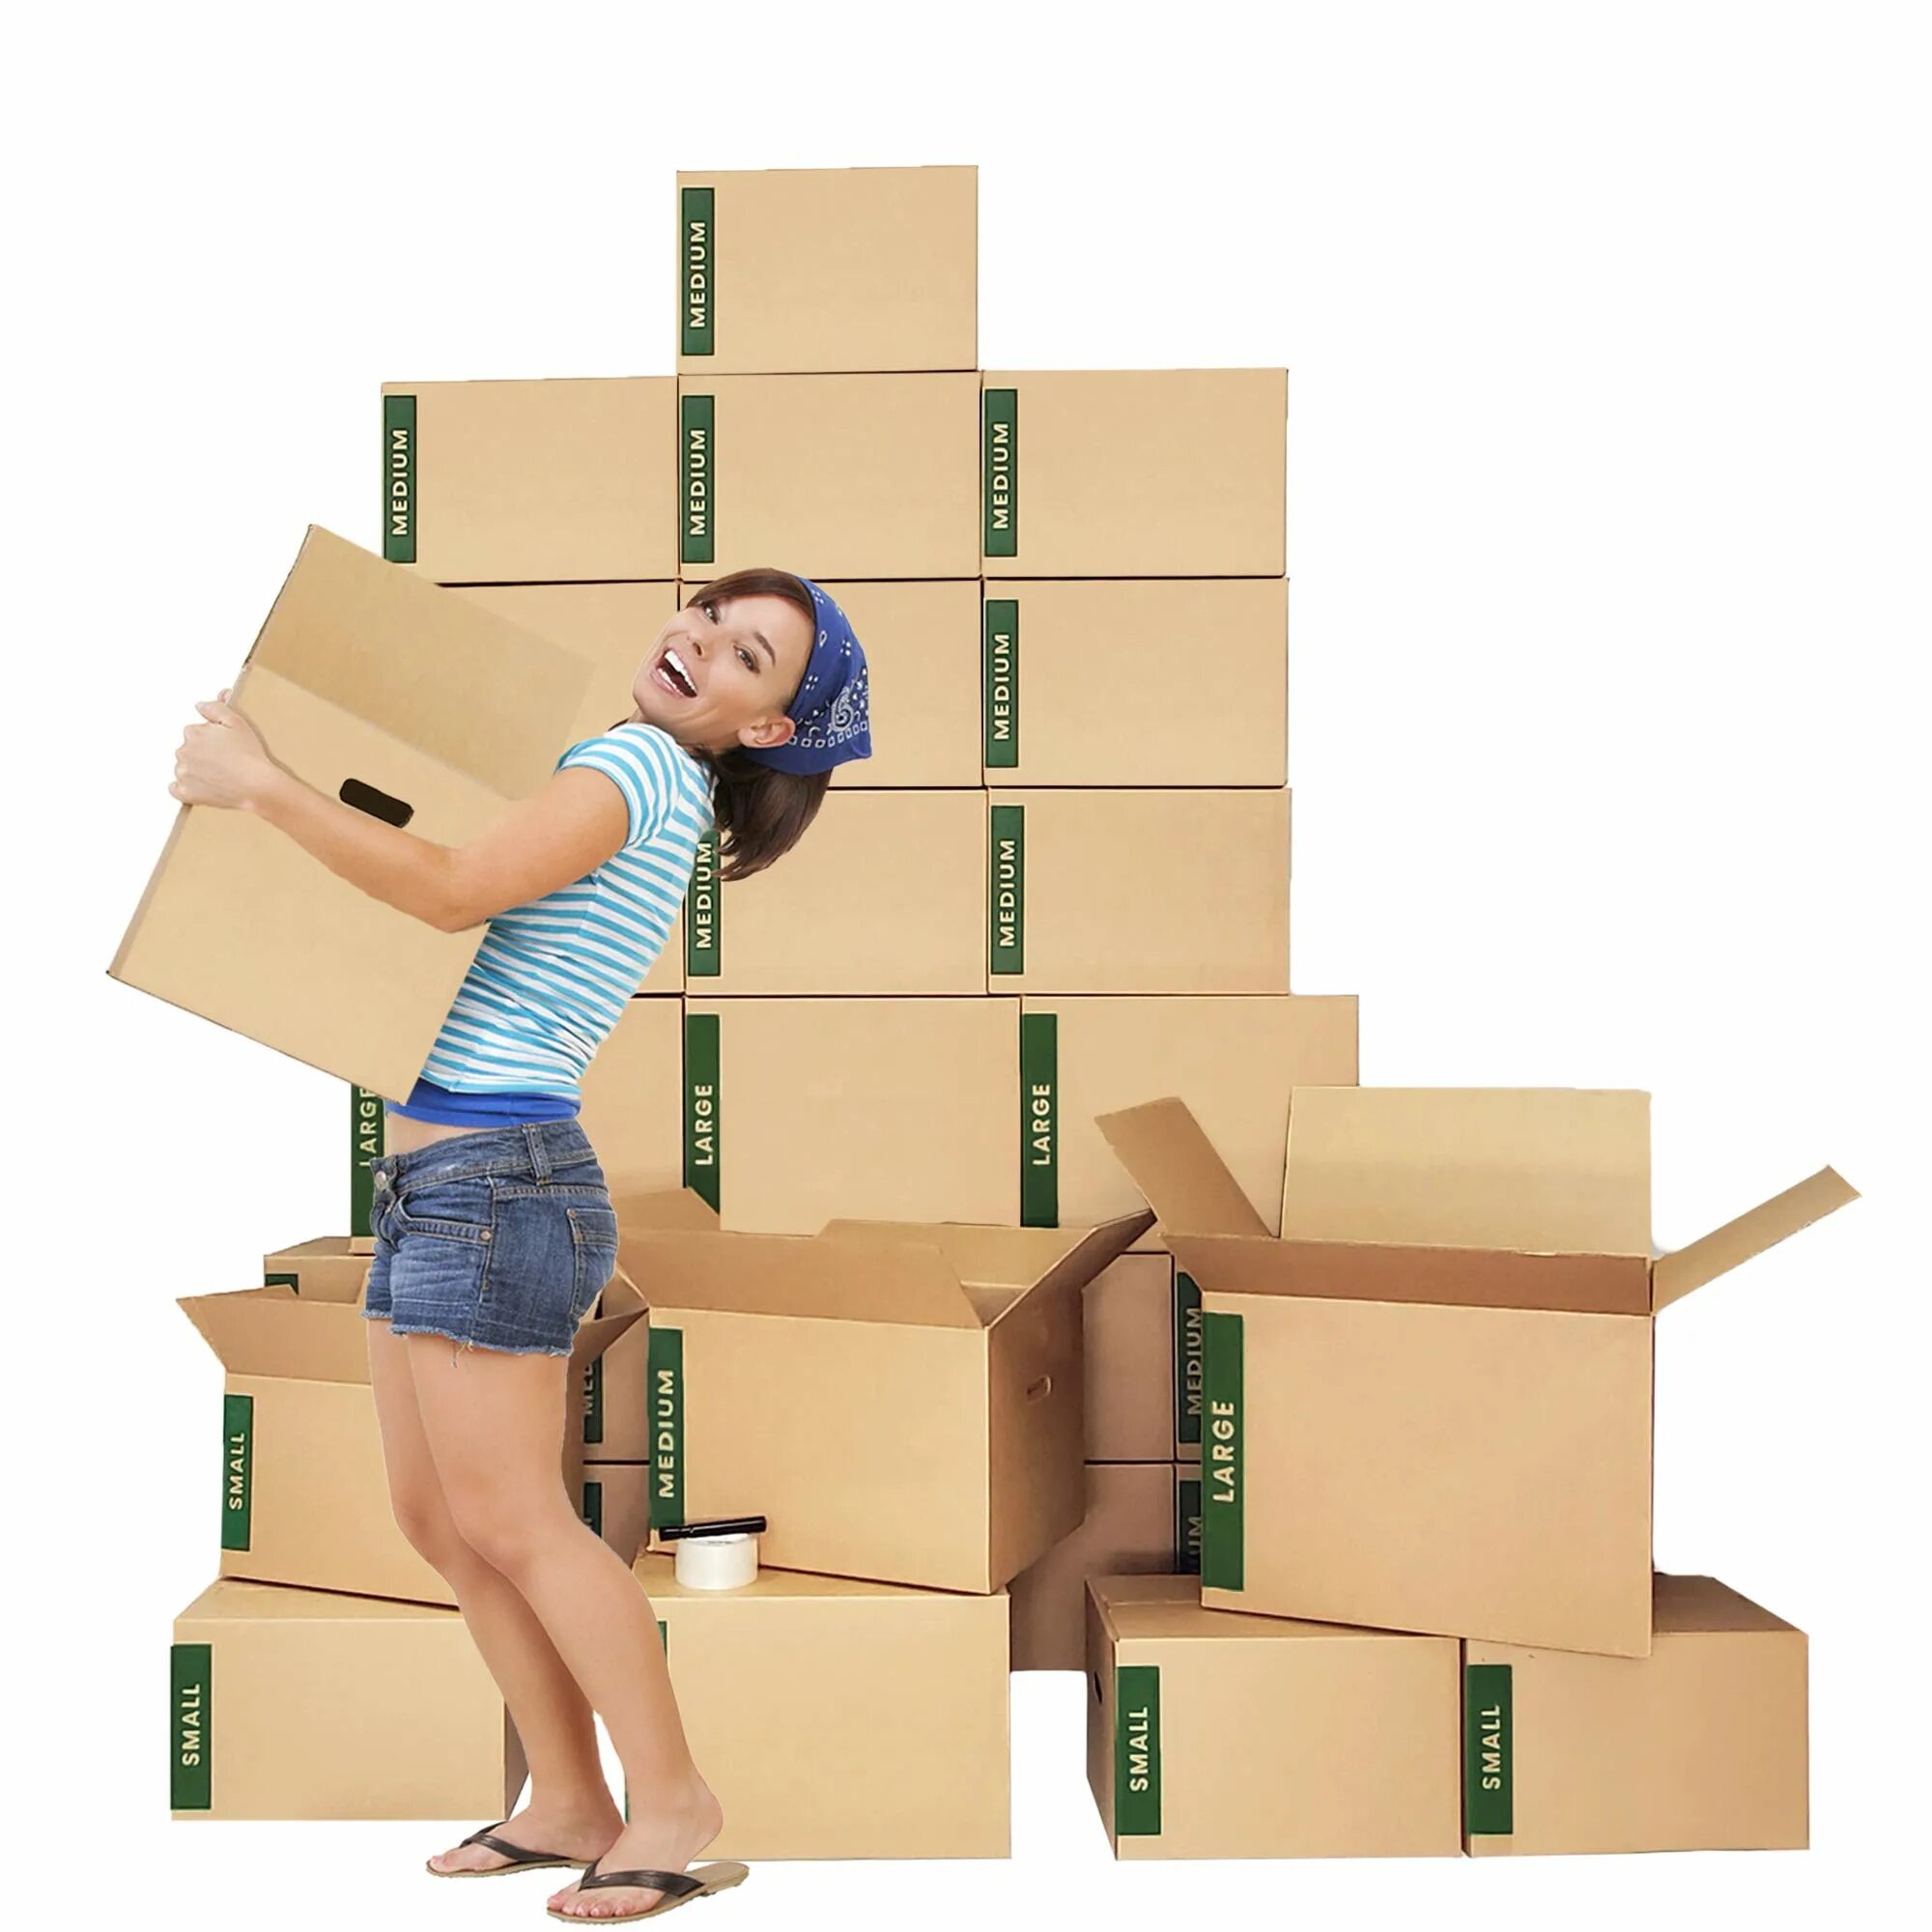 Move order. Moving Boxes. Moving Boxes игра. Shipping Box. Buying Packing Boxes.